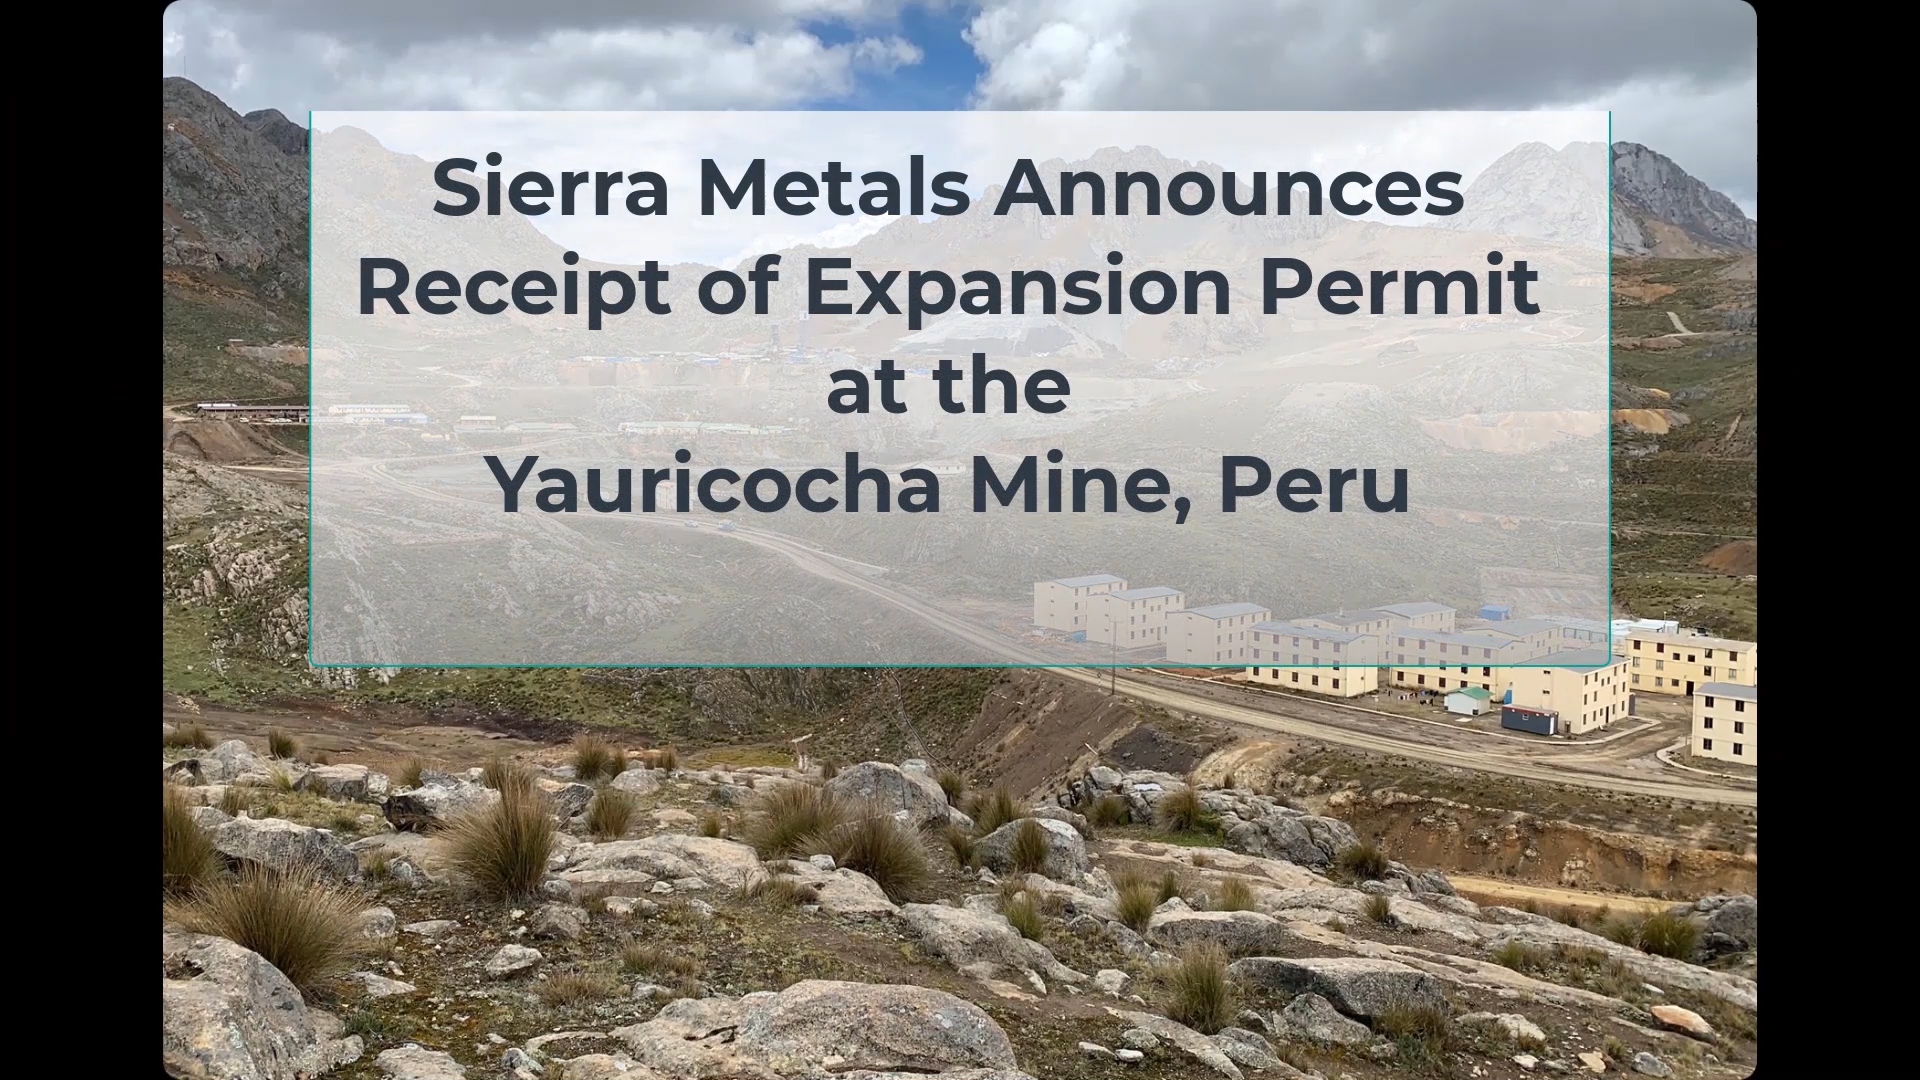 Sierra Metals Receives permit to expand to 3,600 TPD at Yauricocha Mine